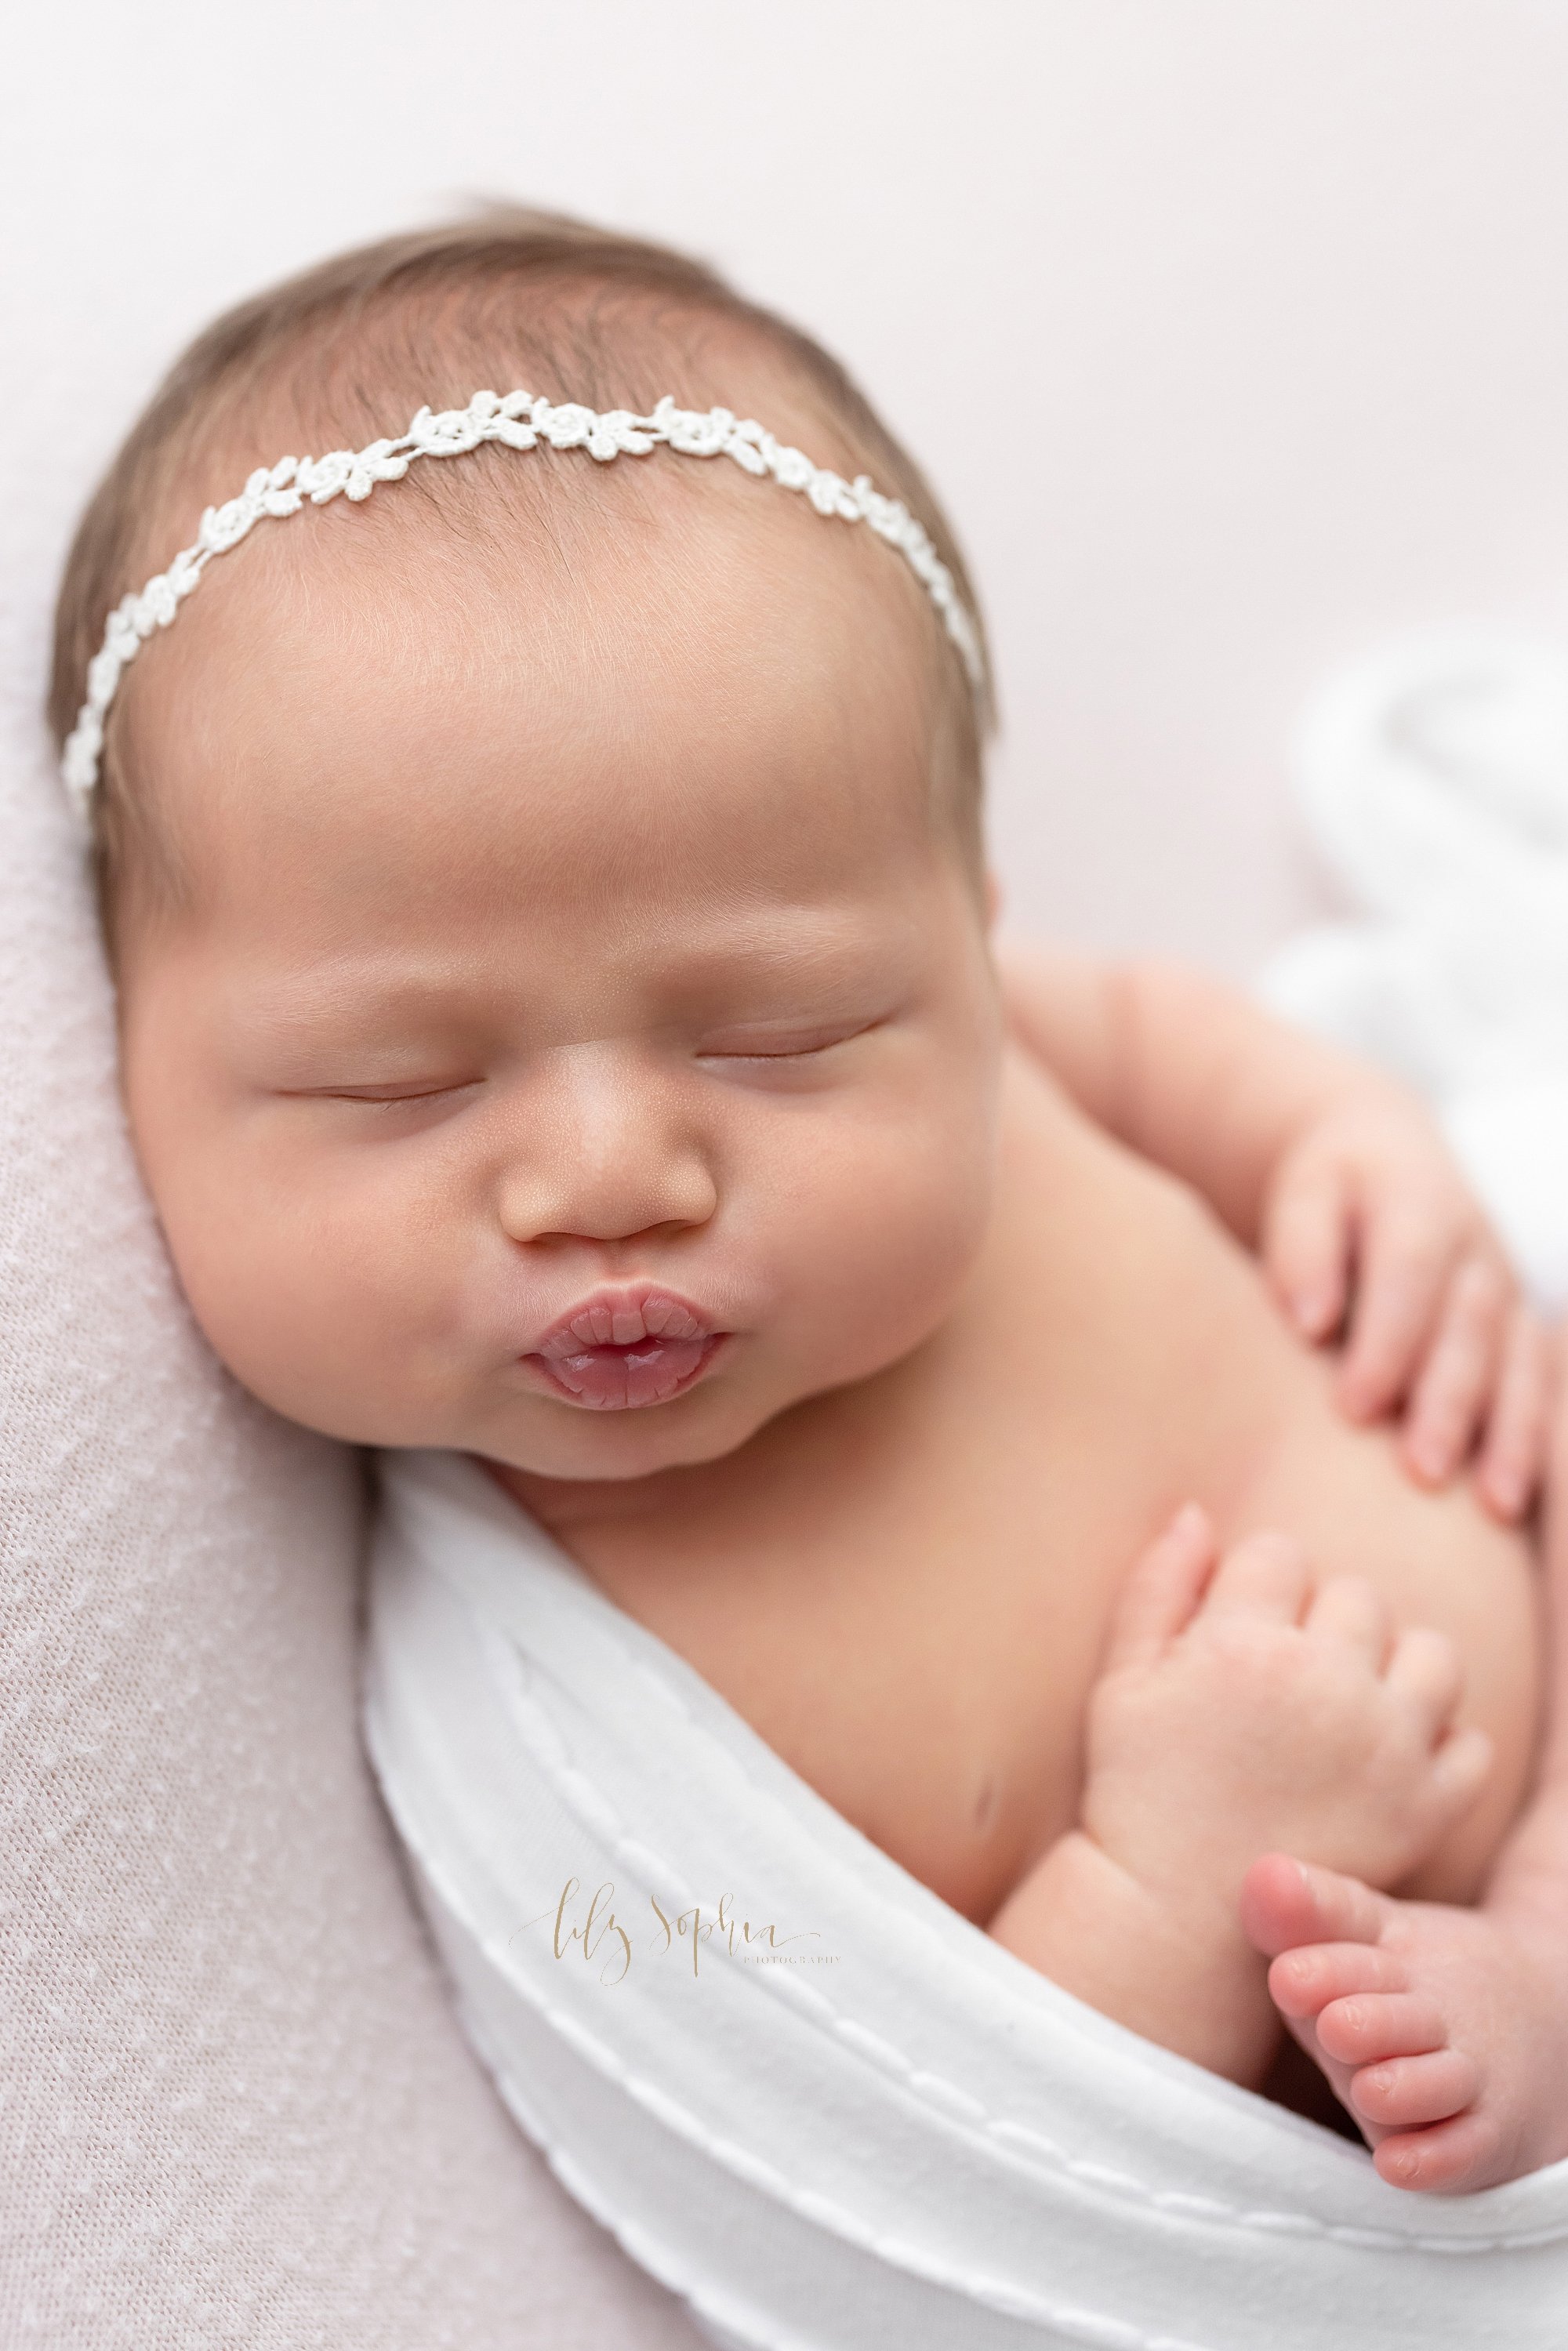  Newborn photo session of a newborn baby girl wearing a delicate headband in her wispy hair as she is cradled in a stretchy swaddle and she puckers her lips as she sleeps taken in a natural light studio near Virginia Highlands in Atlanta, Georgia. 